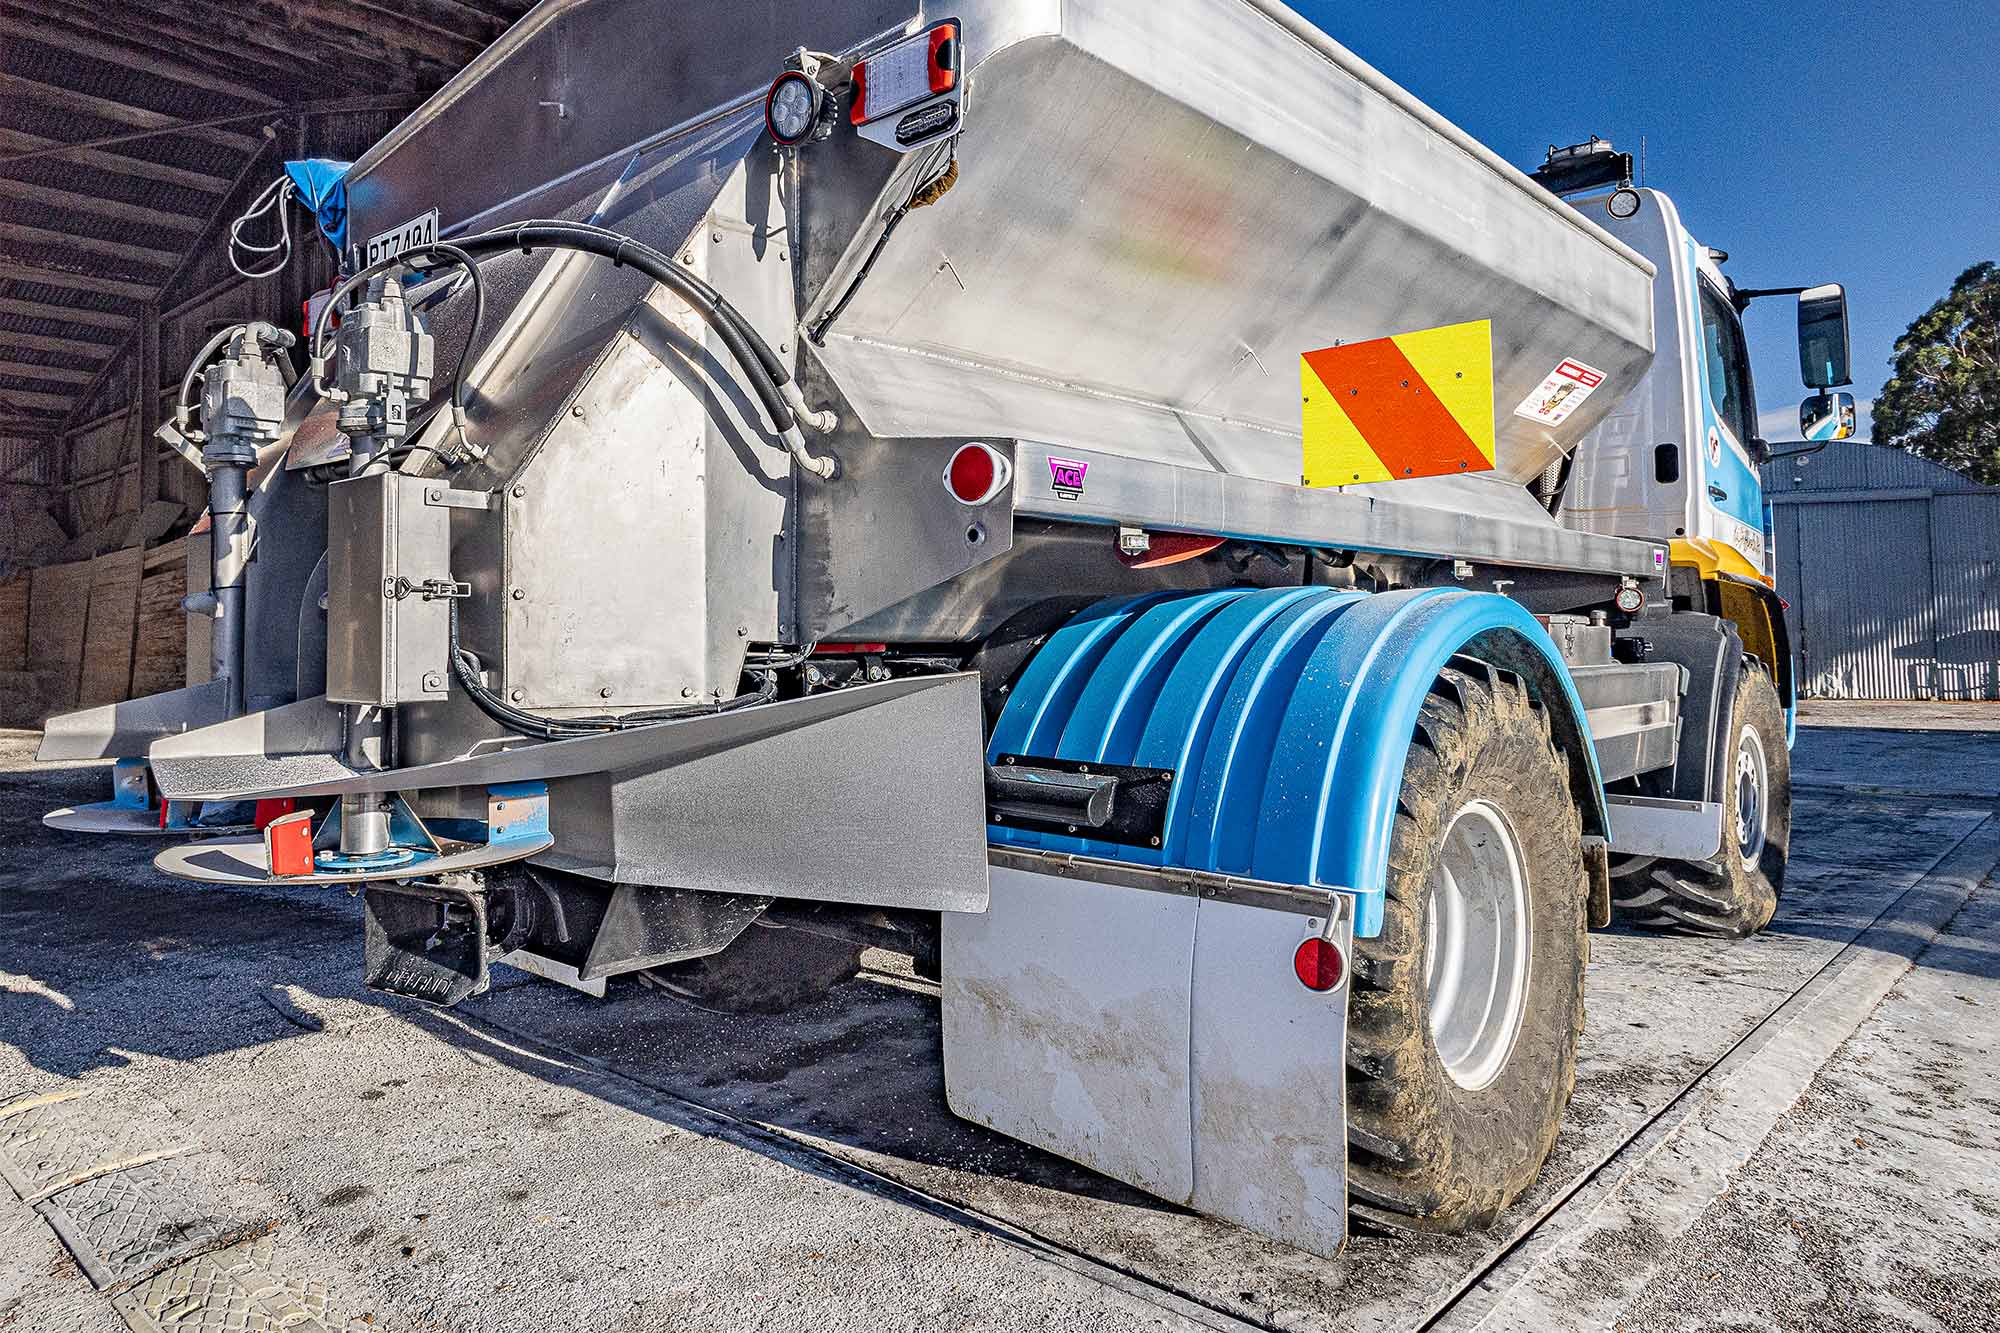 The Mercedes-Benz Atego spreader carries 7T in its bin 